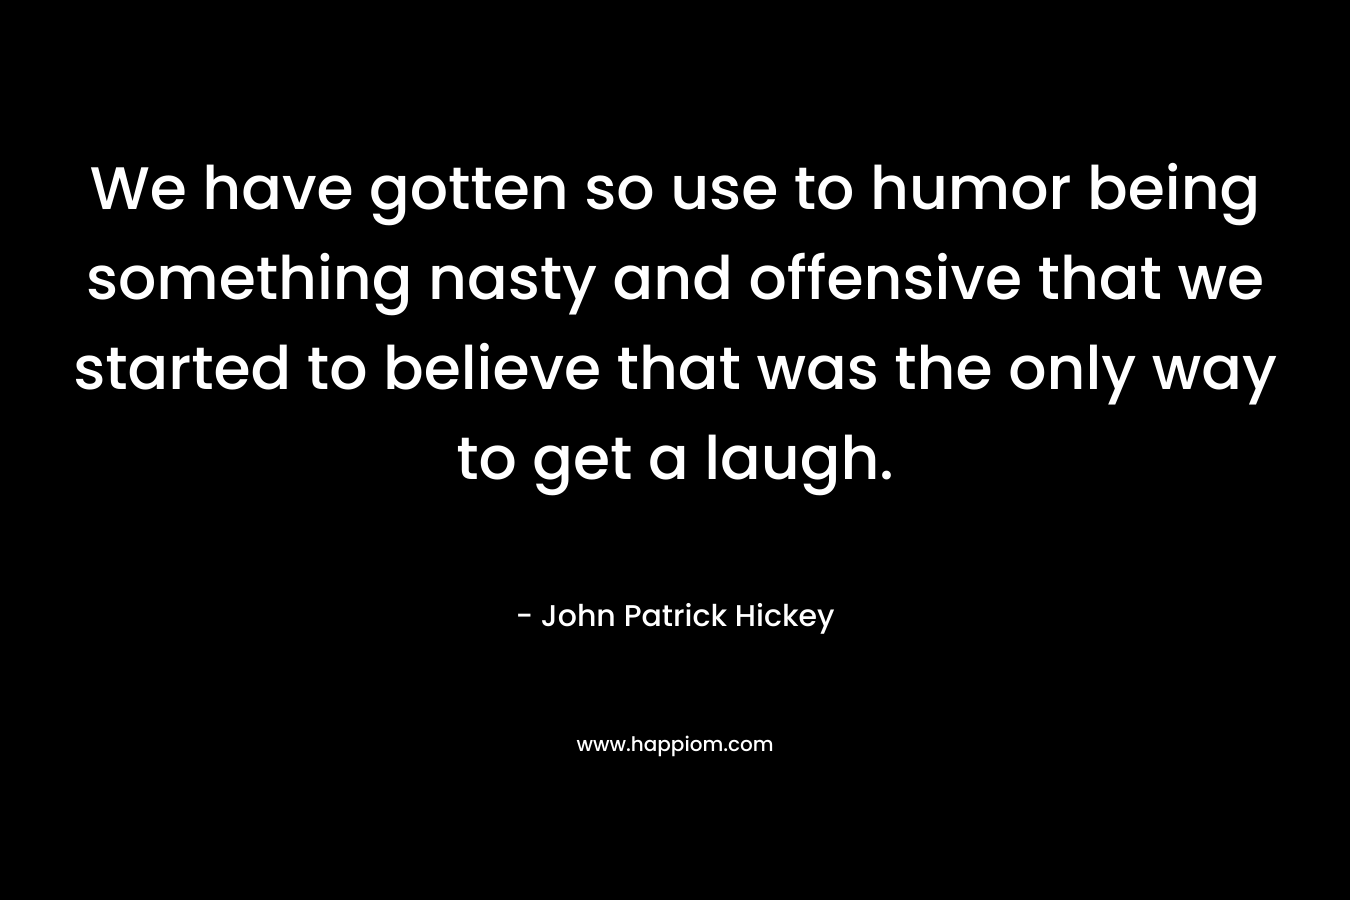 We have gotten so use to humor being something nasty and offensive that we started to believe that was the only way to get a laugh.